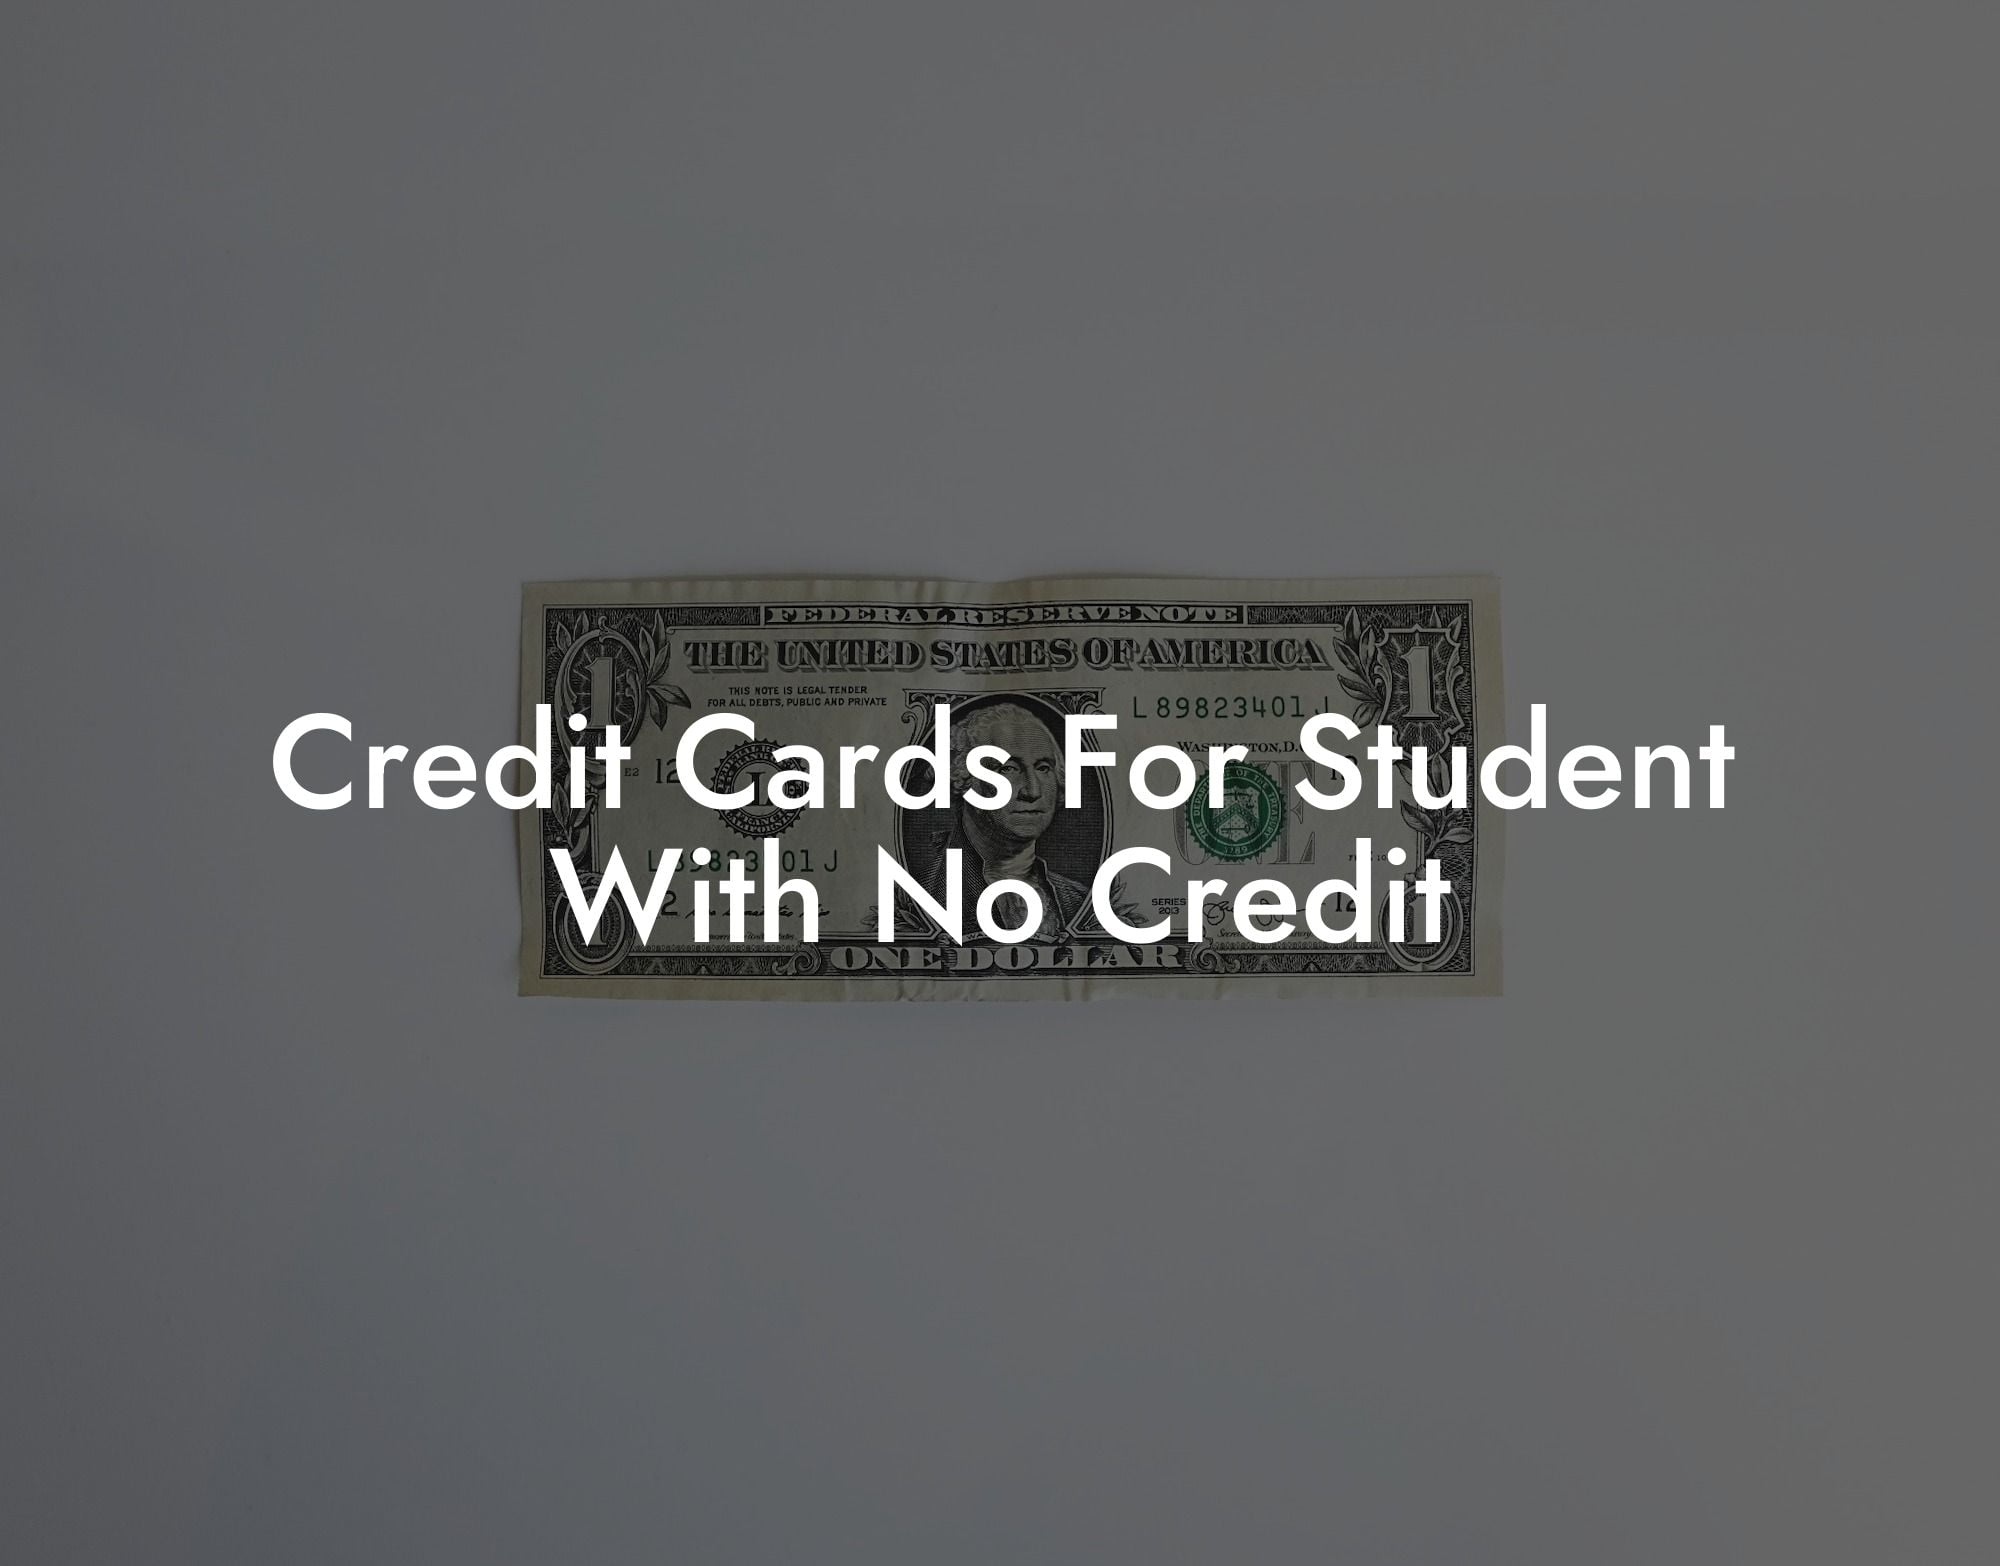 Credit Cards For Student With No Credit